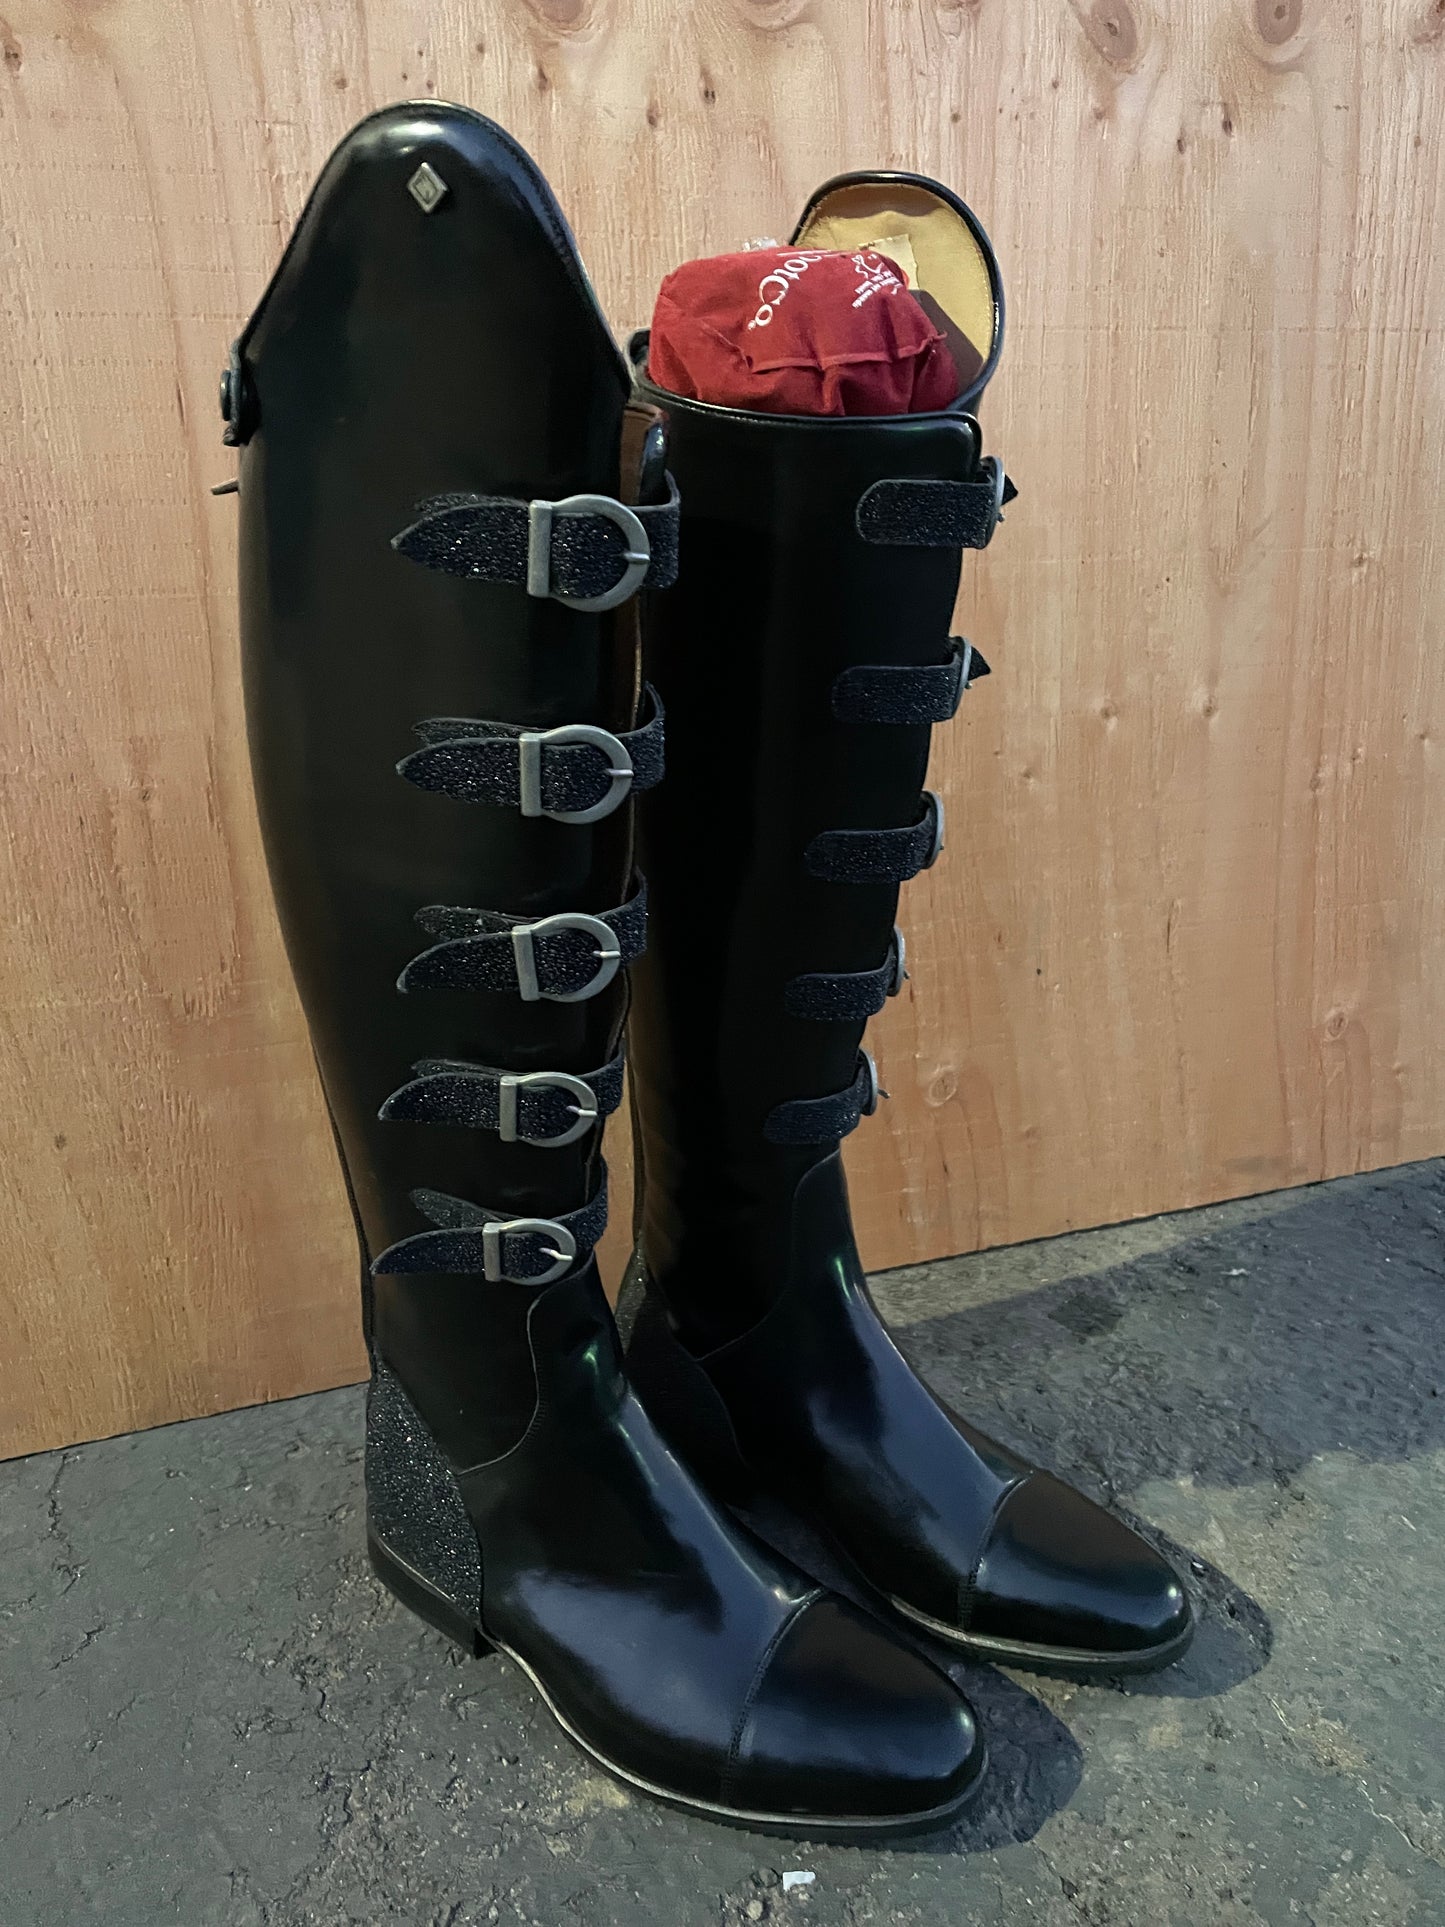 Sale!!!! Deniro Boots With Buckles size 40 MC S